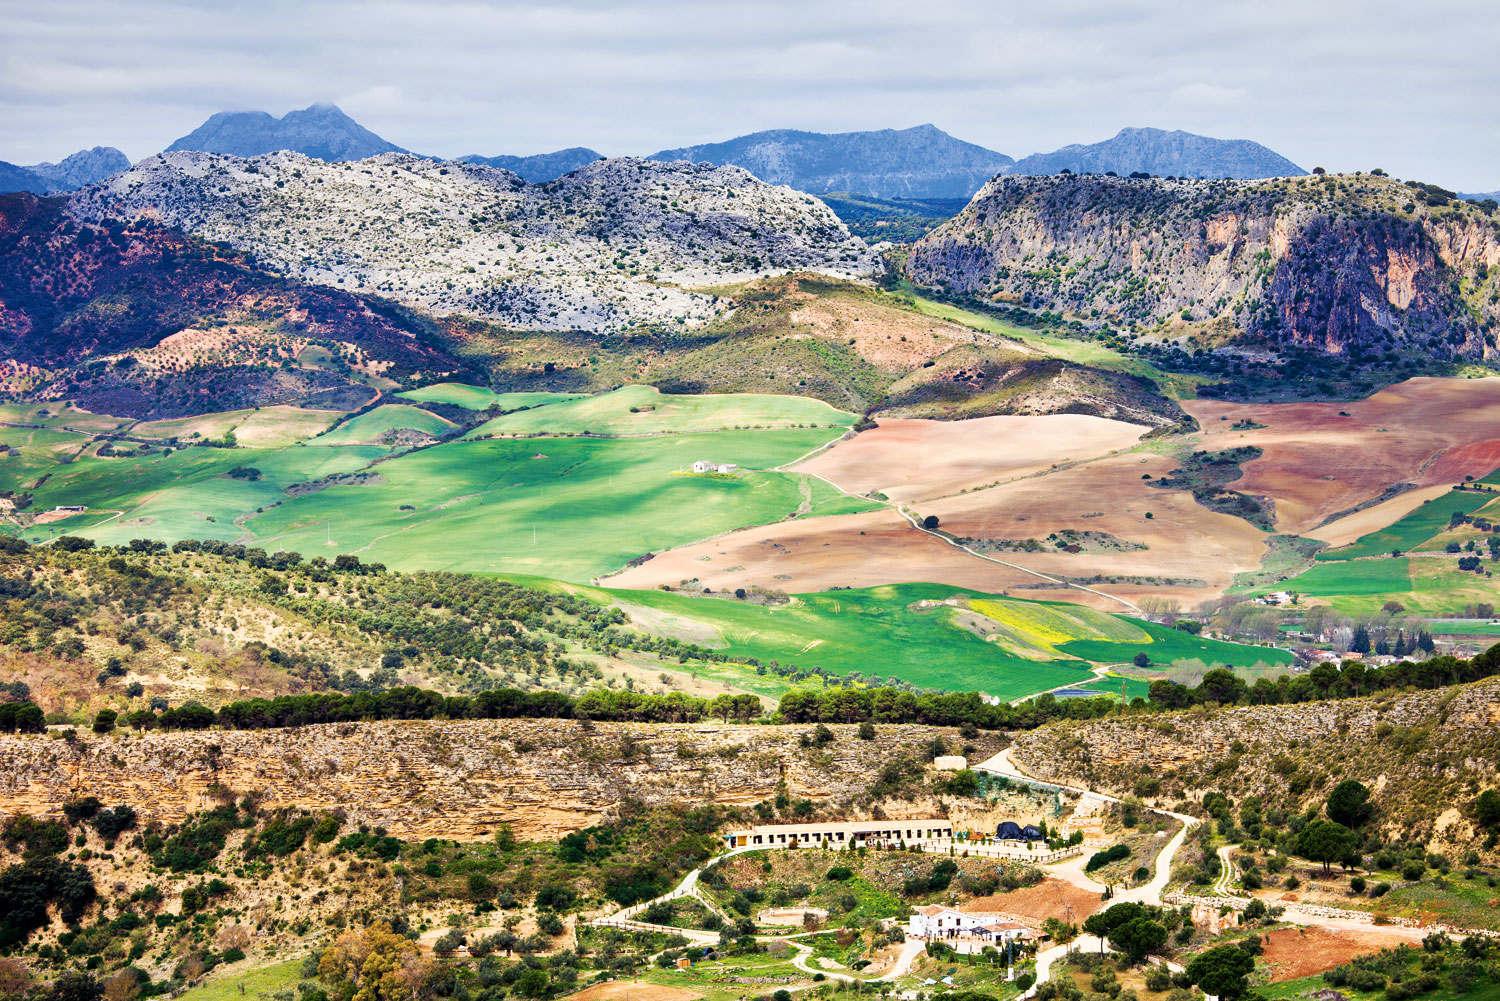 The fertile hills of Andalucía in Spain give way to mountains and their ancient trails.